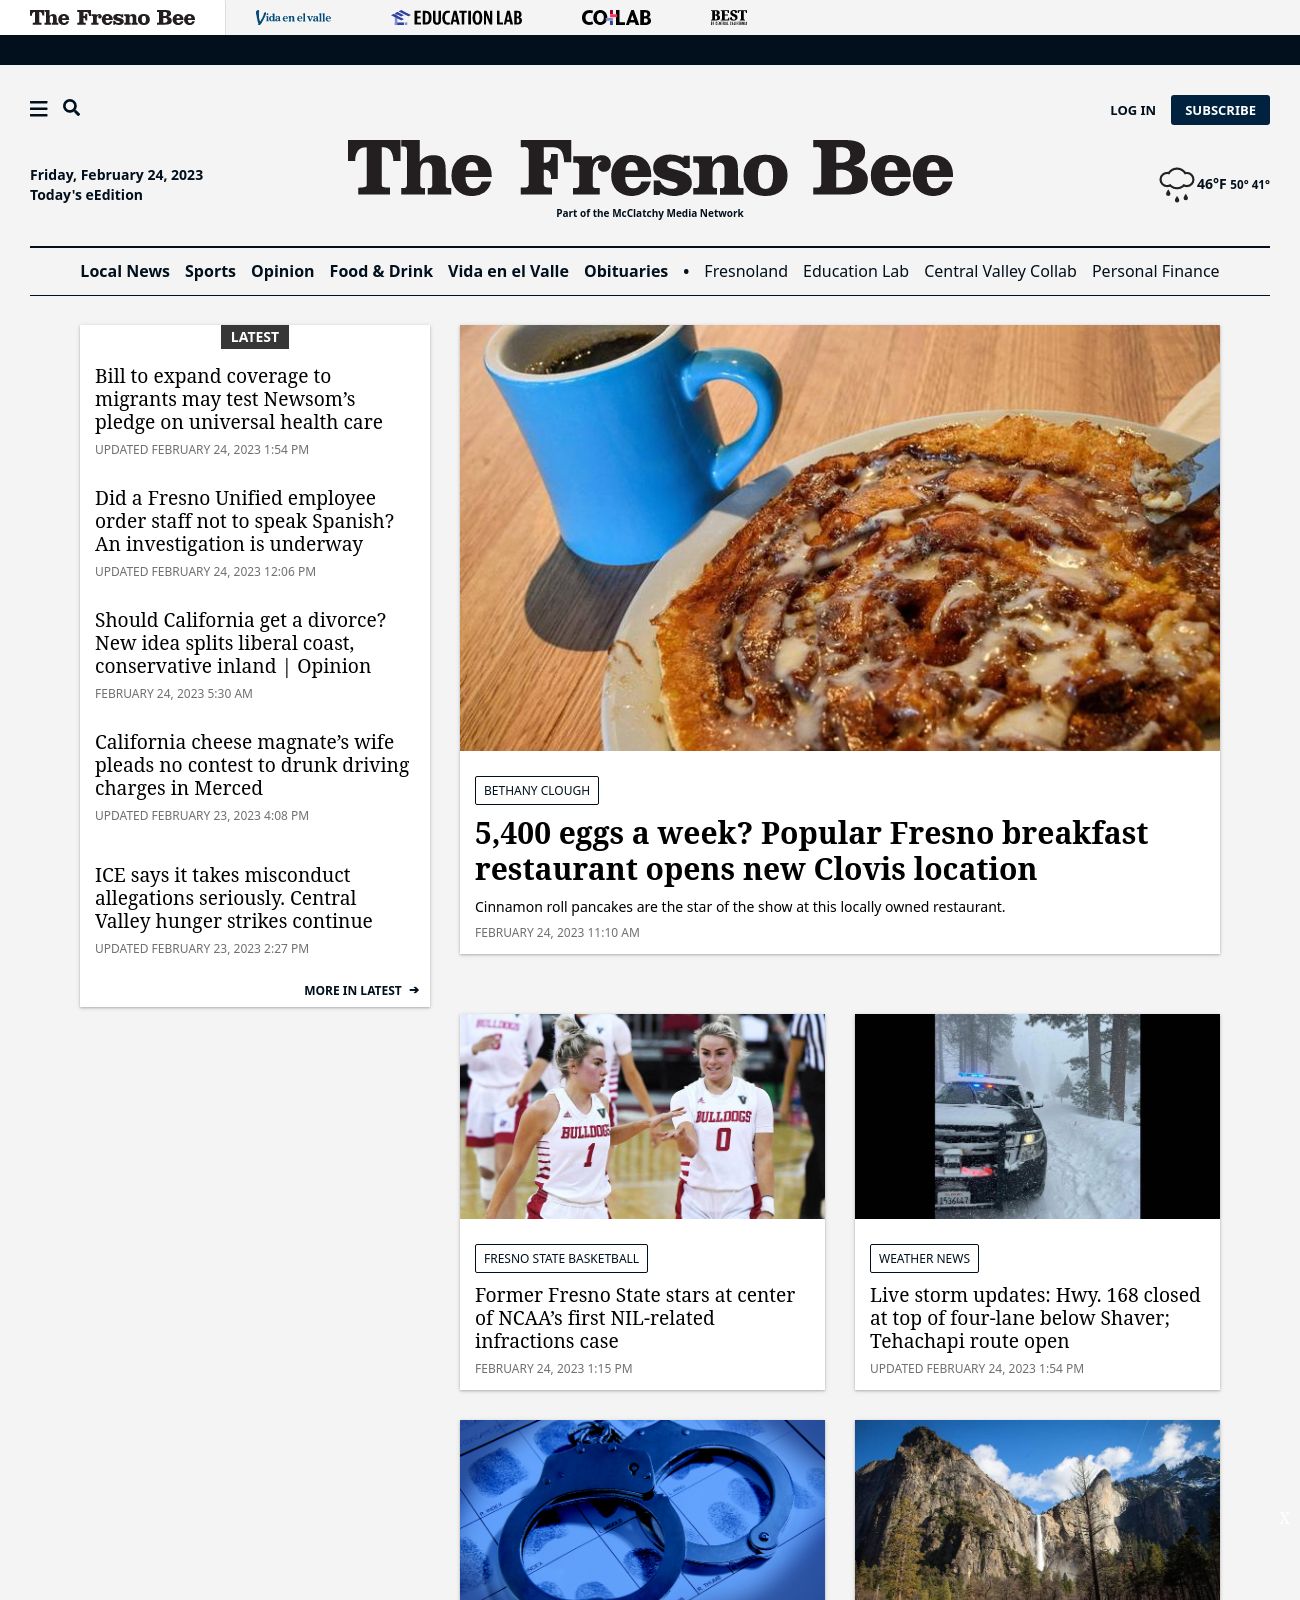 The Fresno Bee at 2023-02-24 14:56:07-08:00 local time